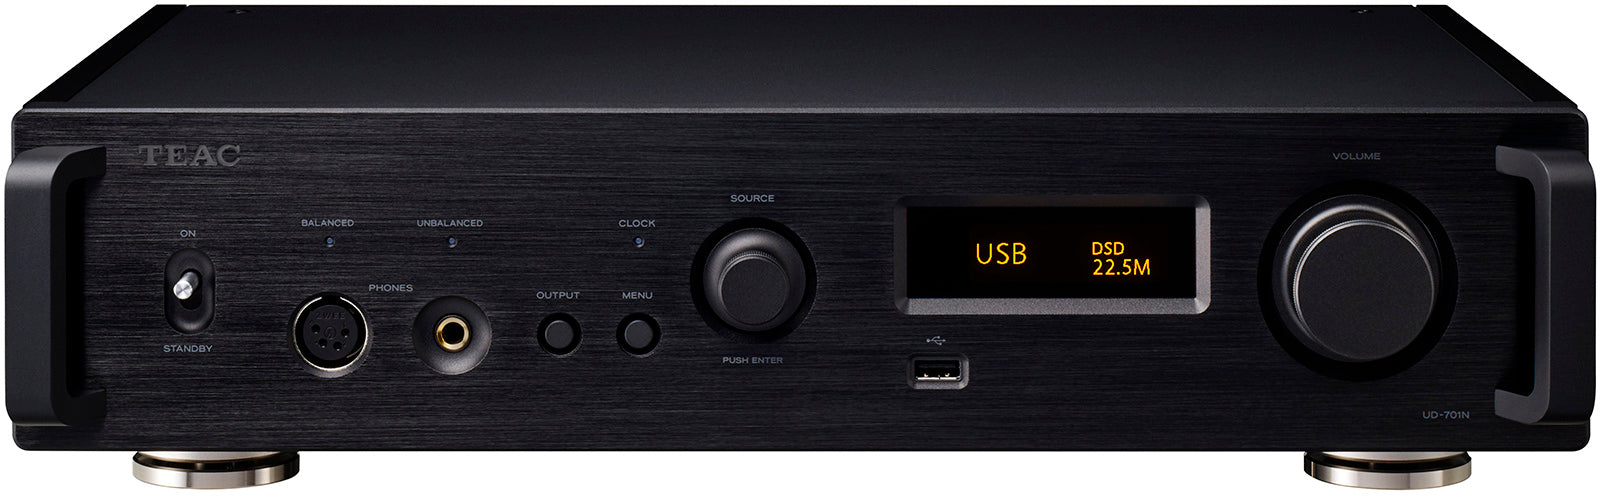 TEAC UD-701N USB DAC/Network Player - Safe and Sound HQ